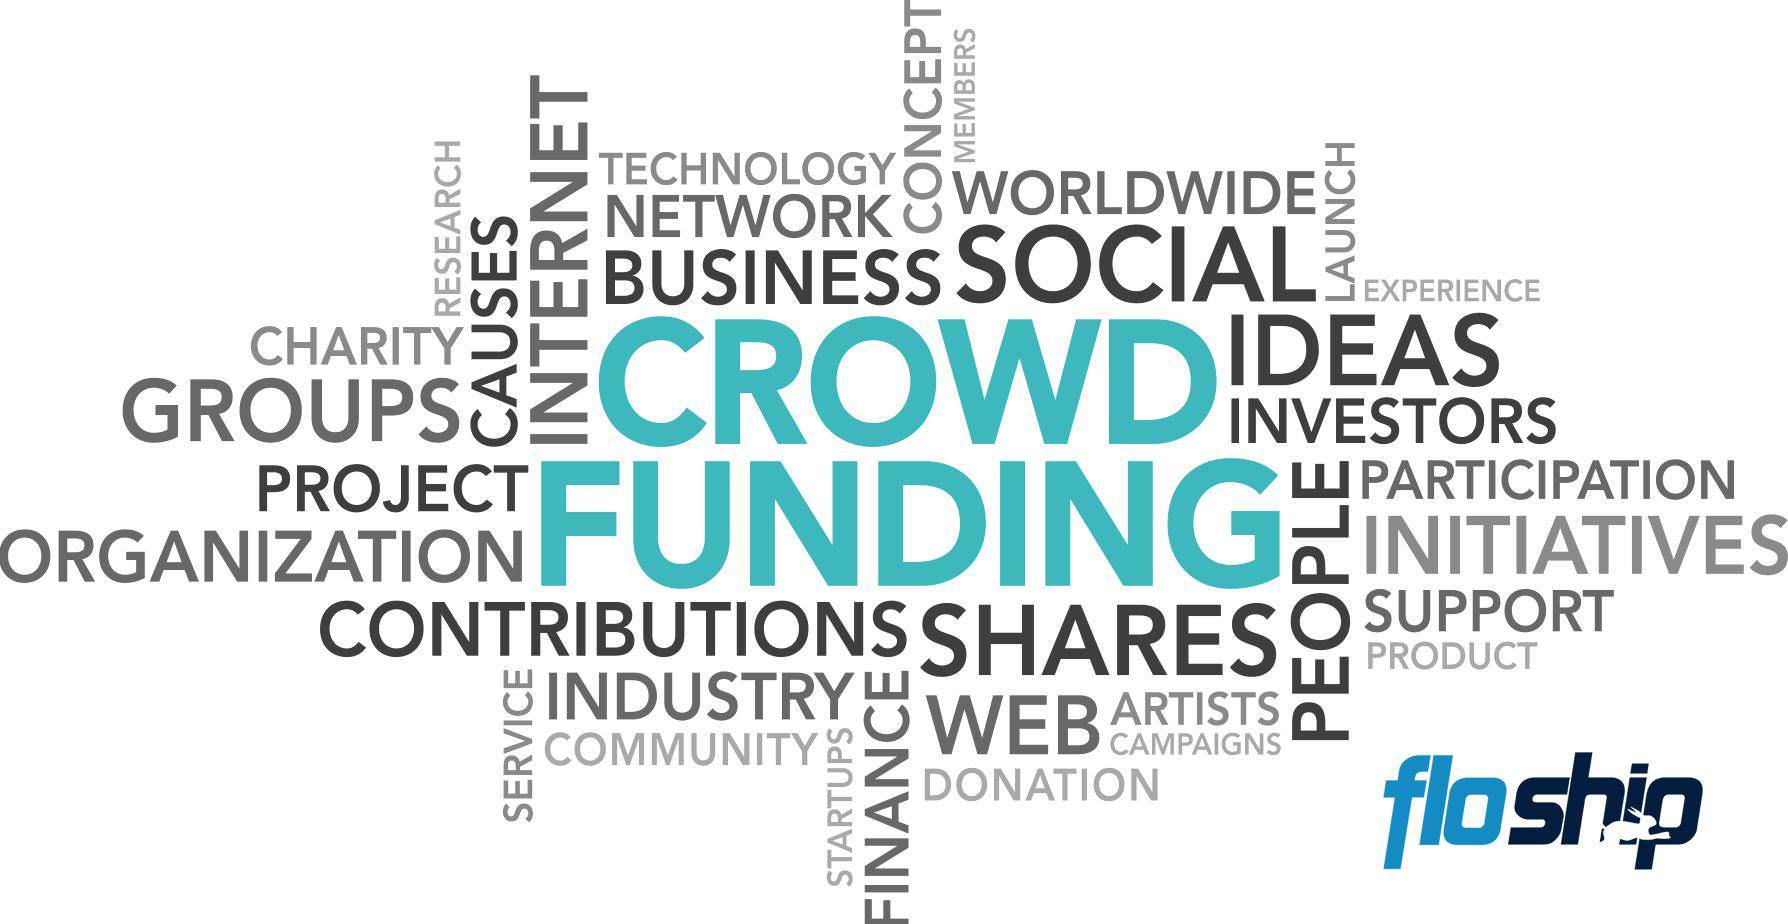 crowdsourcing fulfillment floship international shipping for crowdfunding websites